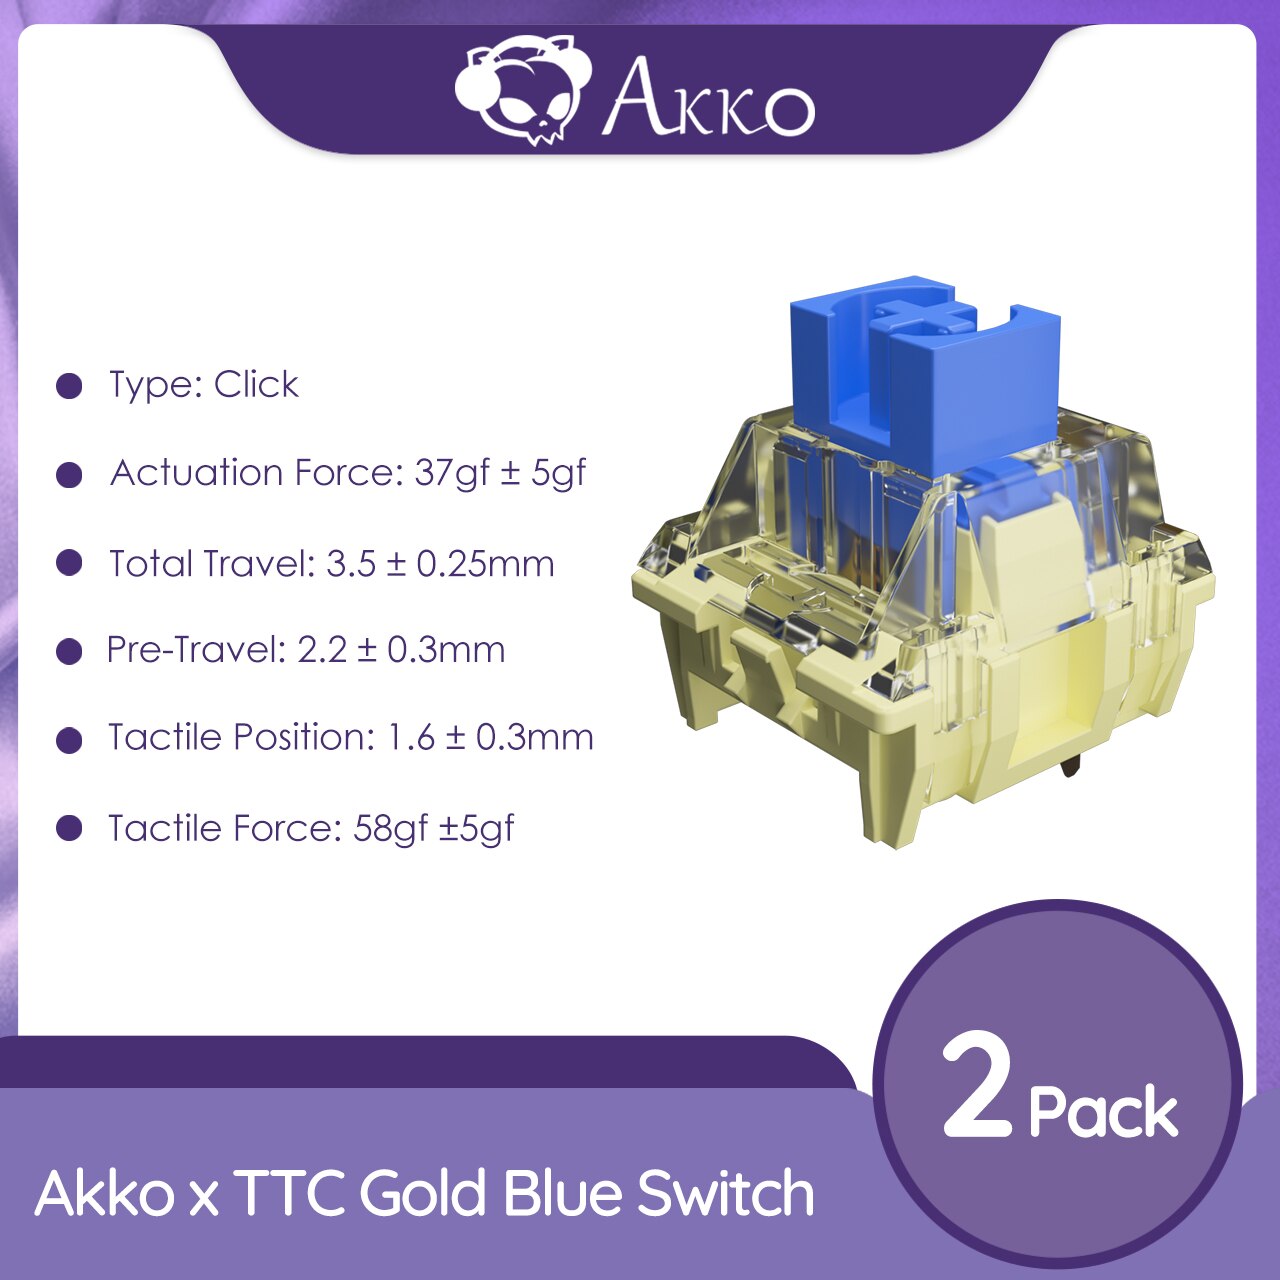 Akko x TTC Gold Blue Switch 3 Pin 37gf Click Switch Compatible for Hot-swappable Custom DIY MX Mechanical Keyboard (45 pcs)